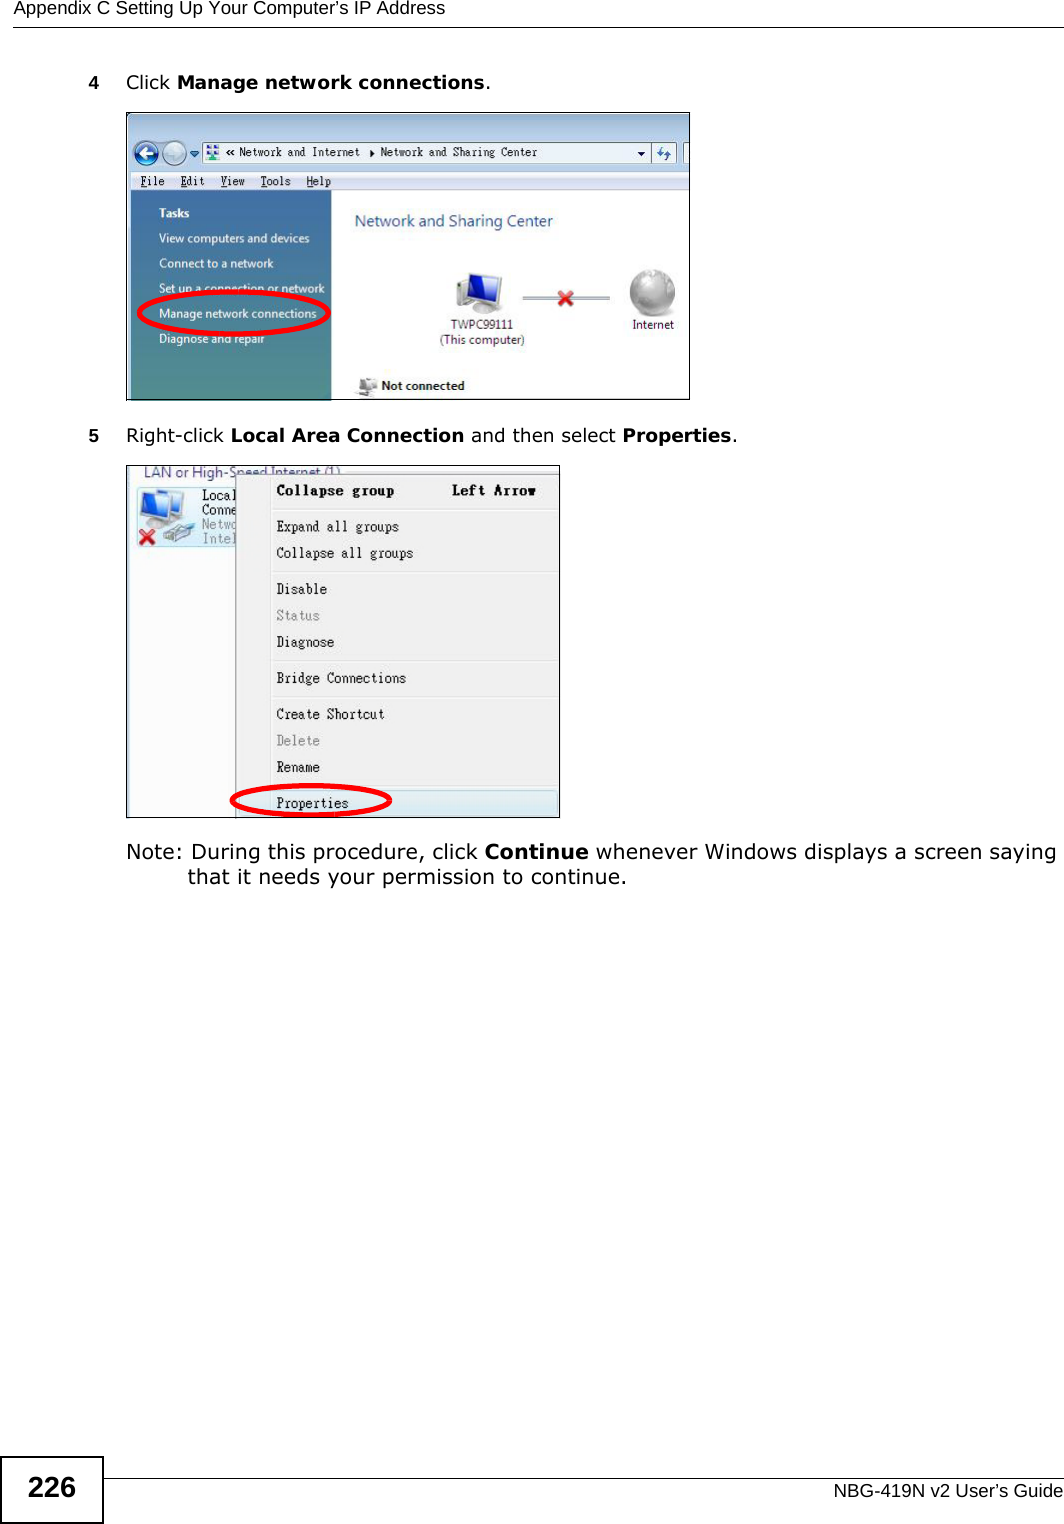 Appendix C Setting Up Your Computer’s IP AddressNBG-419N v2 User’s Guide2264Click Manage network connections.5Right-click Local Area Connection and then select Properties.Note: During this procedure, click Continue whenever Windows displays a screen saying that it needs your permission to continue.